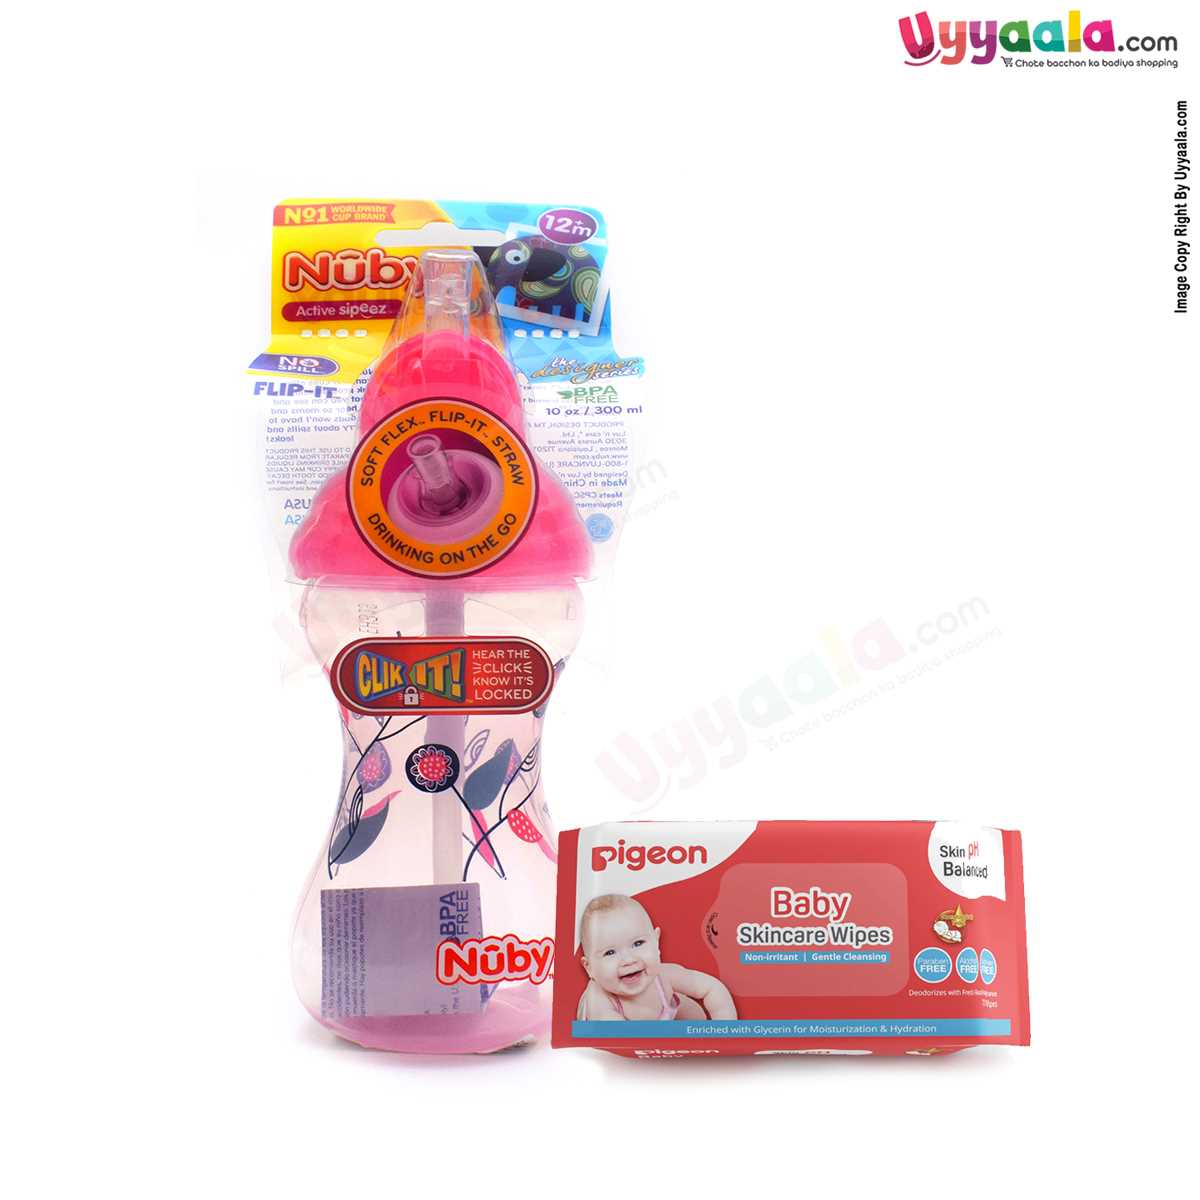 NUBY sipper bottle with soft flexible straw-300ml, Red, 12+m age & PIGEON Baby skincare wipes - 72pcs(combo pack)